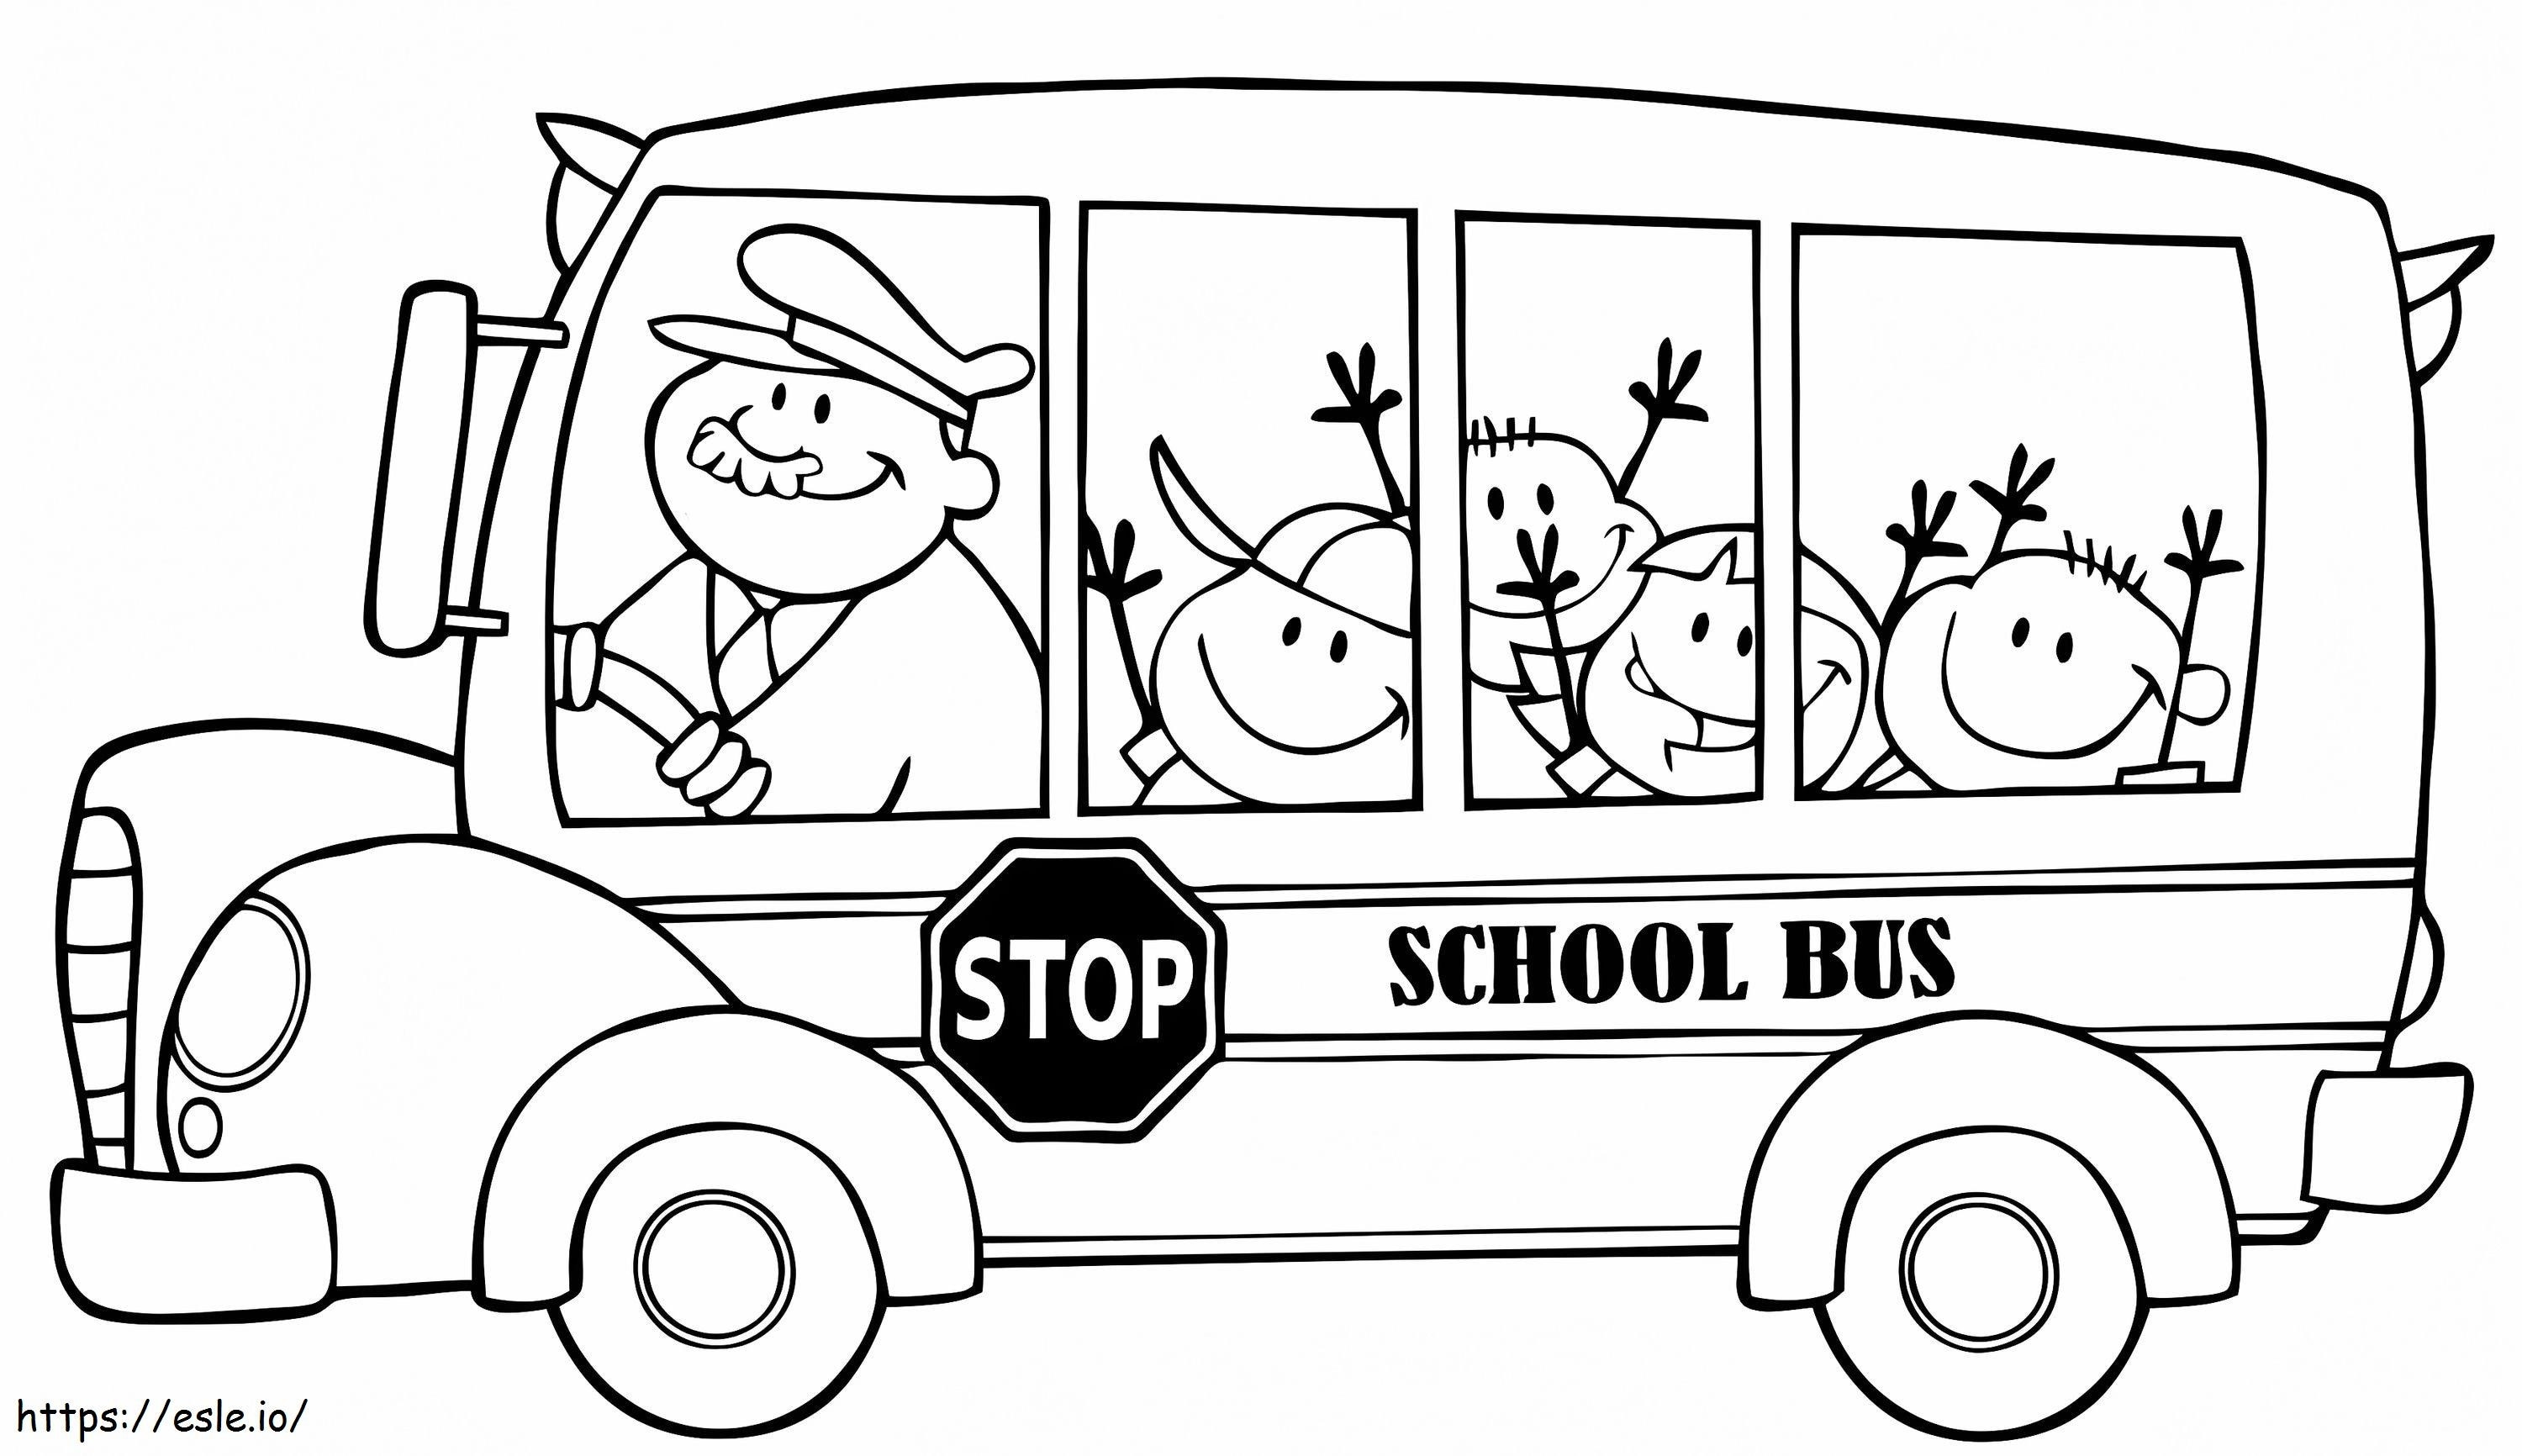 Children On The School Bus coloring page